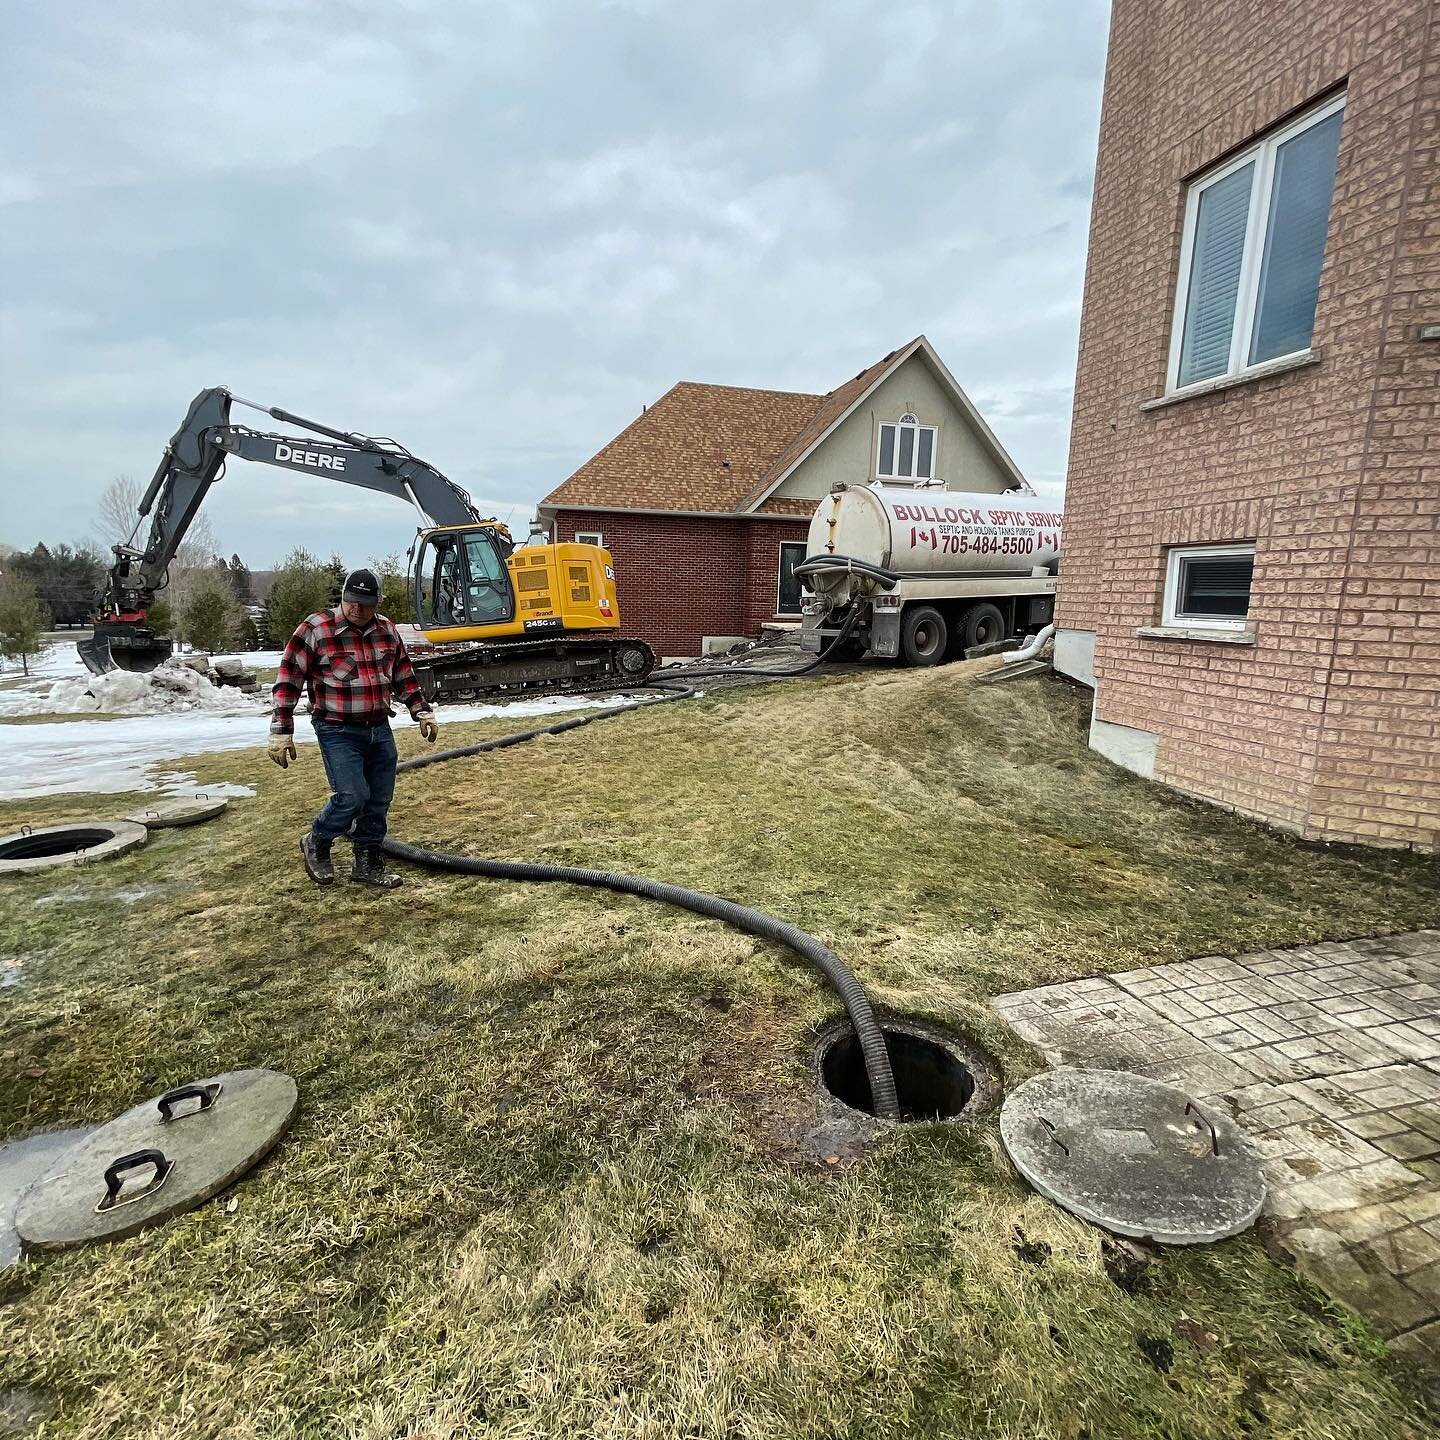 The team was busy preparing for a basement excavation next door to this site when the smell of sewage knocked. After asking the homeowner for permission to investigate we found a failed pump and faulty high level alarm. The homeowner had been unaware